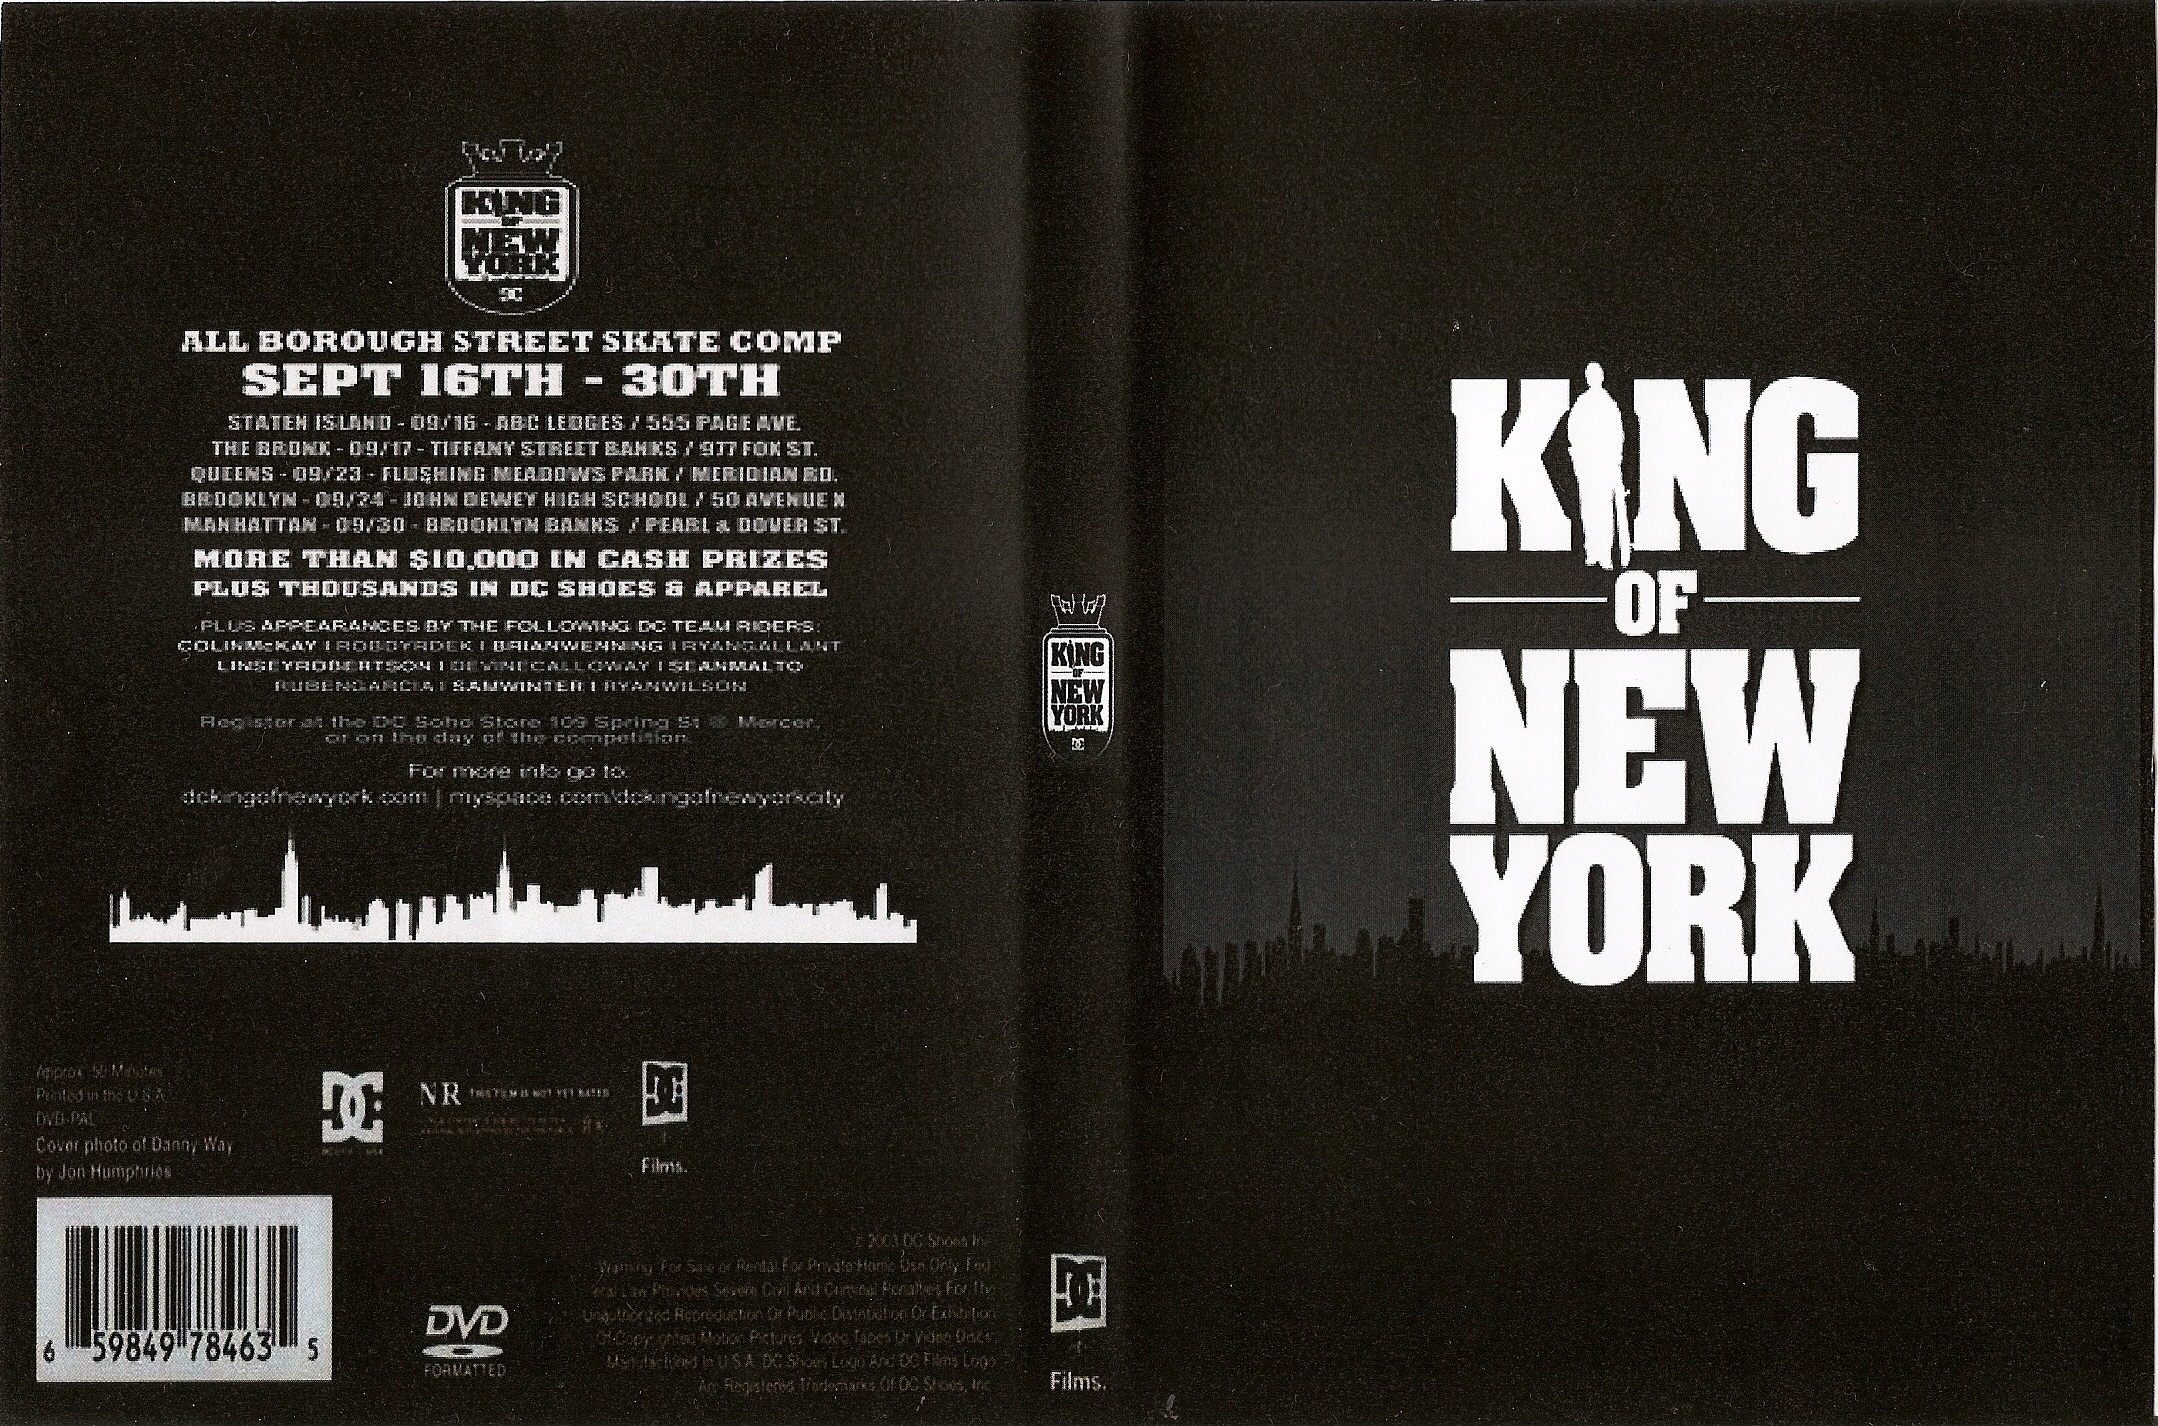 King Of New York Backgrounds, Compatible - PC, Mobile, Gadgets| 2158x1426 px